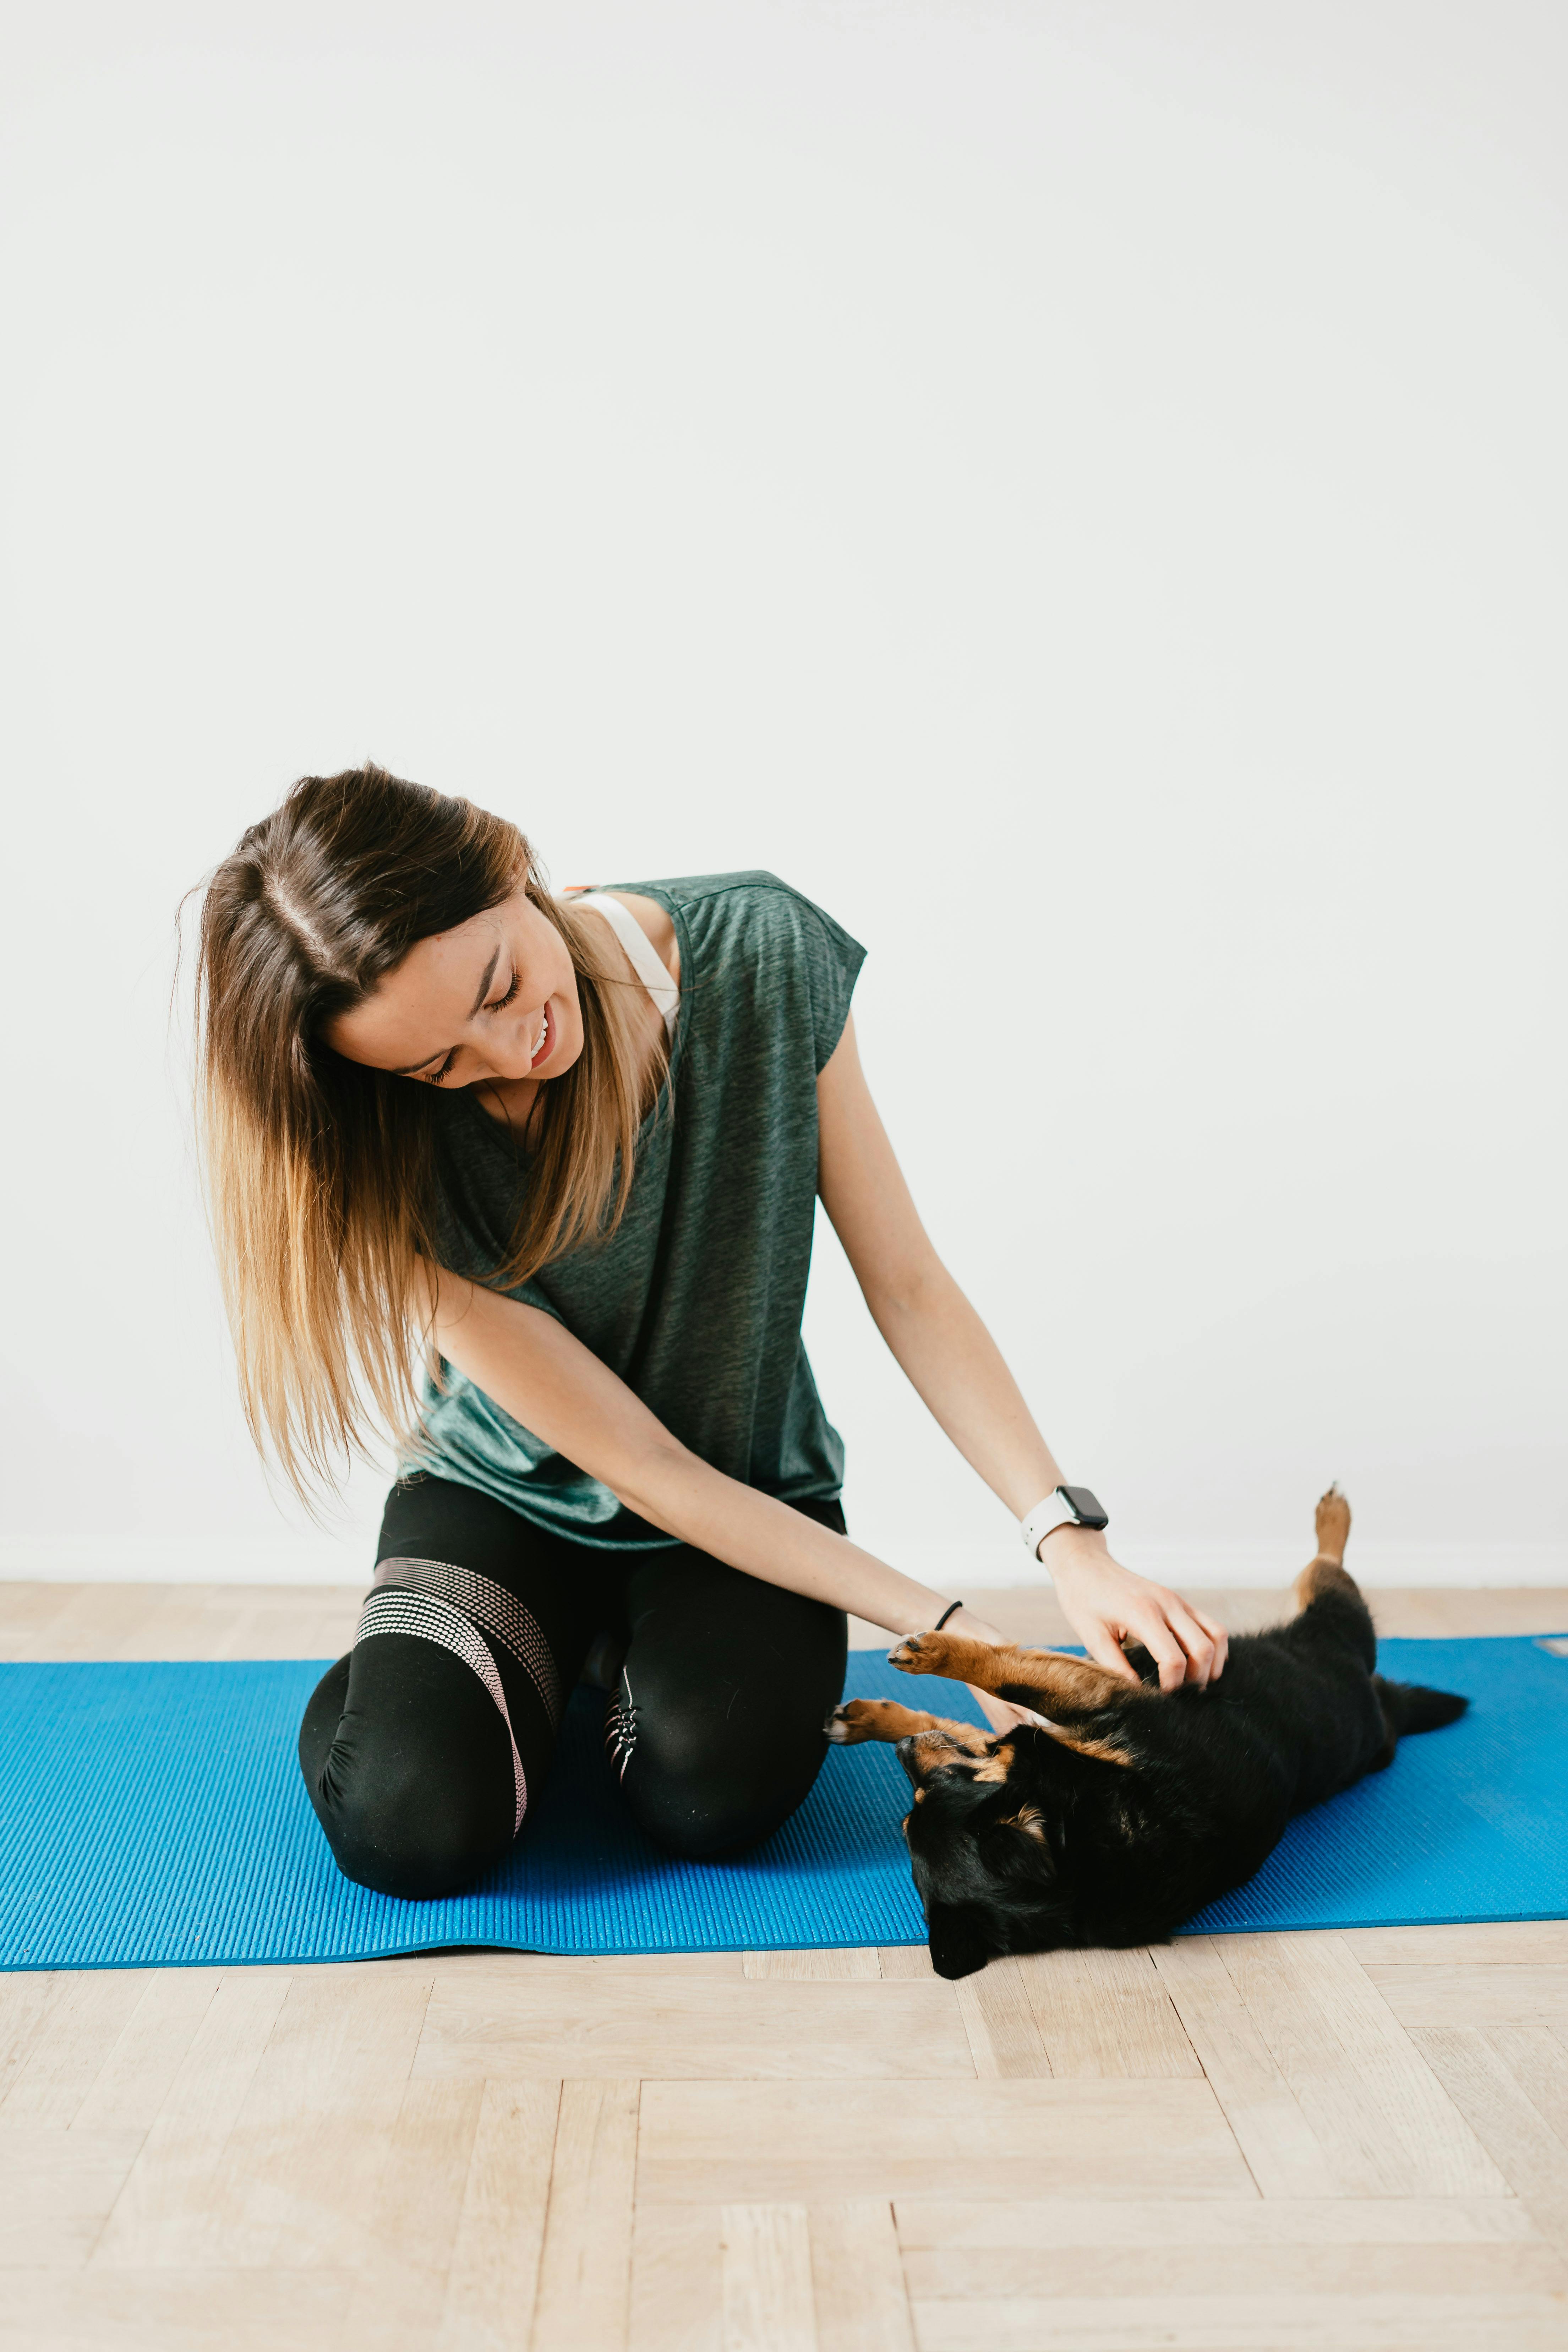 Crop unrecognizable woman training small purebred dog on yoga mat · Free  Stock Photo